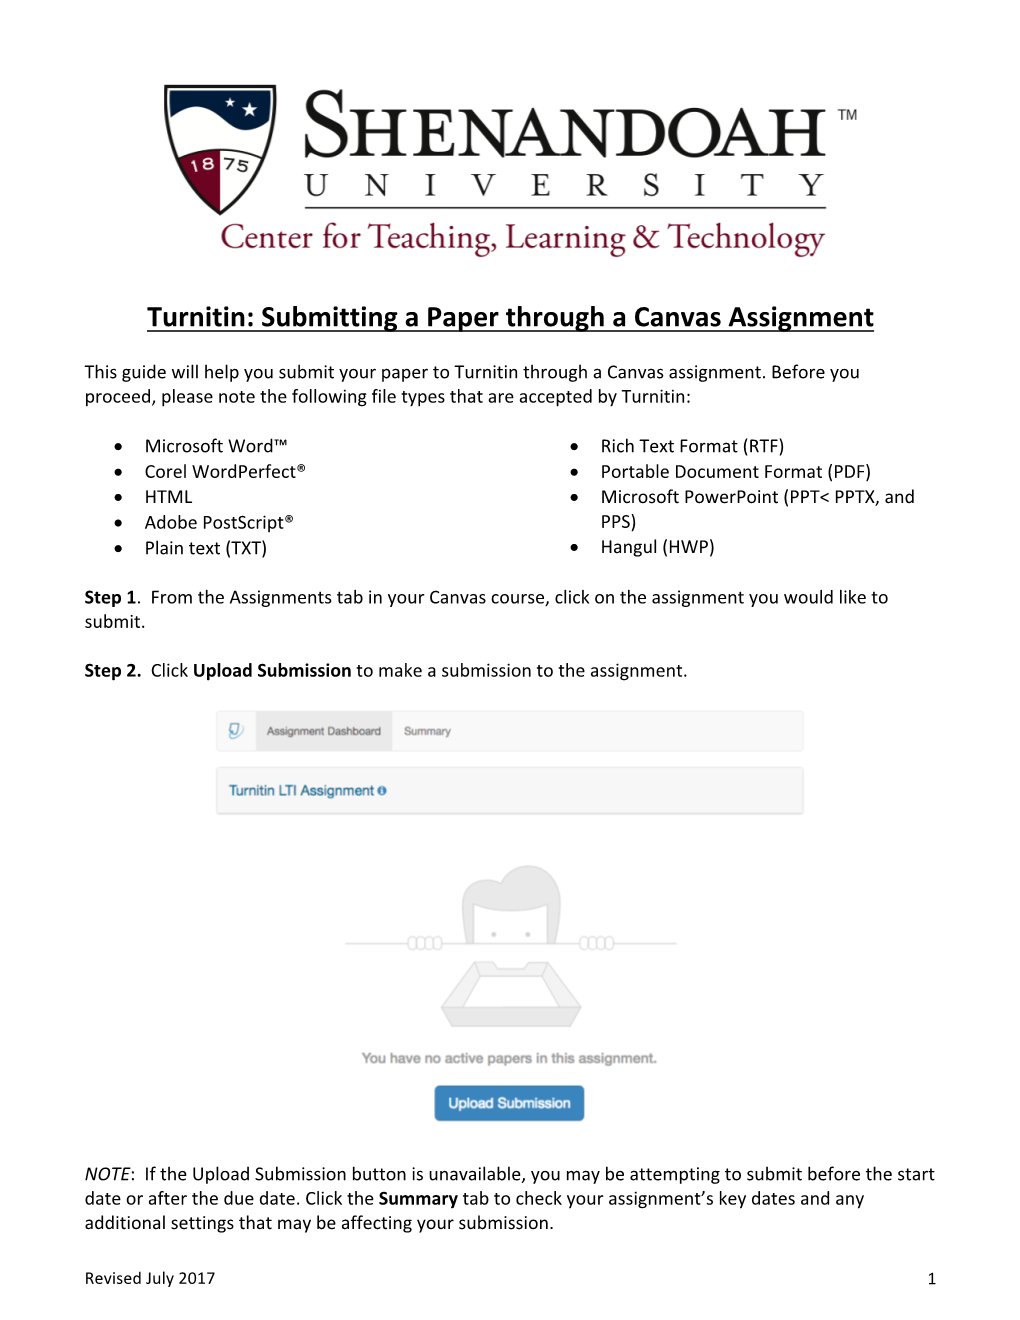 Turnitin: Submitting a Paper Through a Canvas Assignment